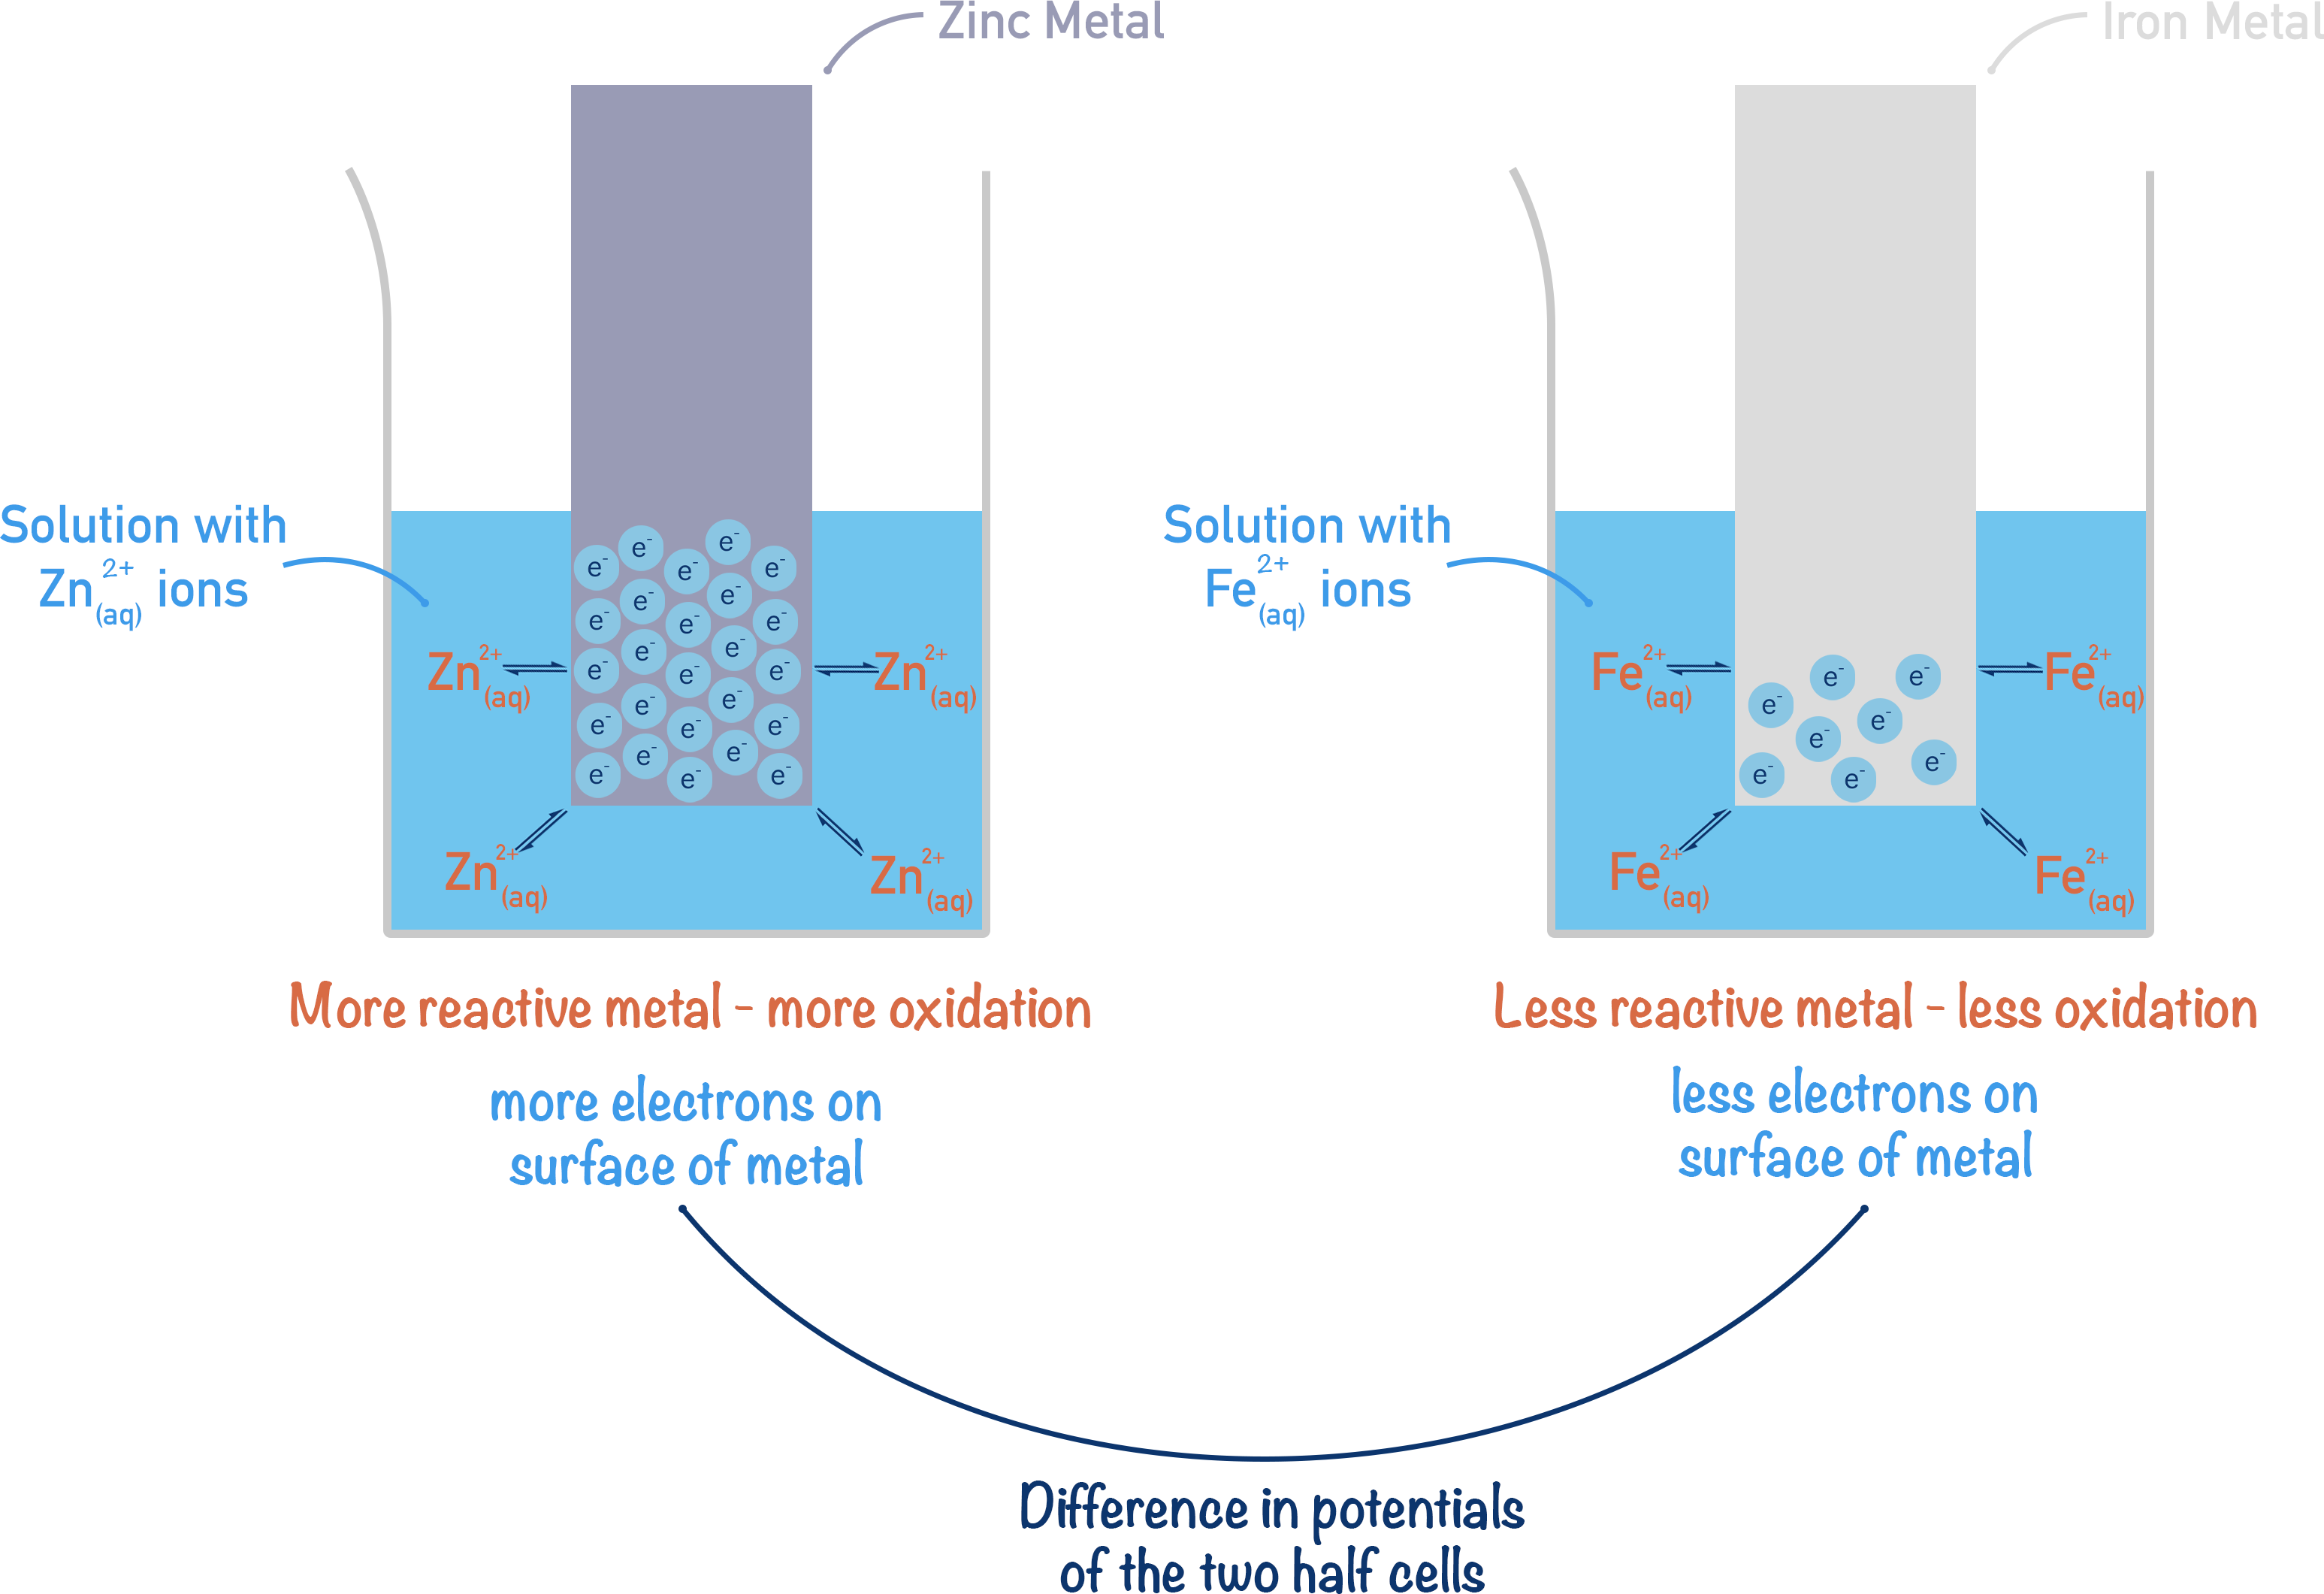 electrochemistry half cells potential difference zinc iron a-level chemistry